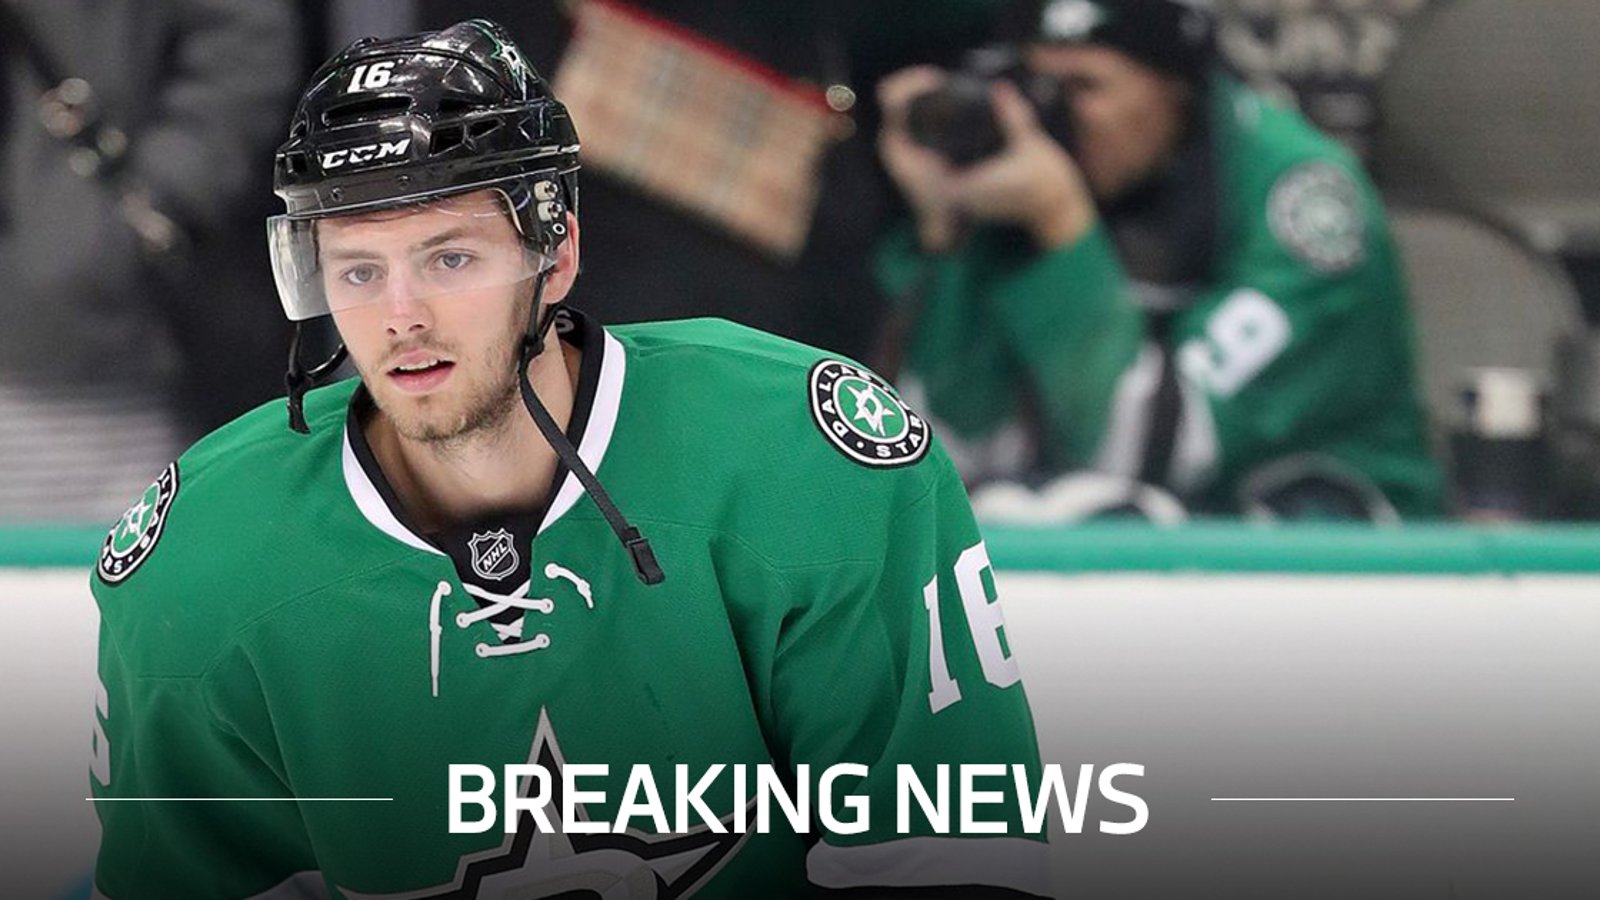 Breaking: Stars recall former first round pick